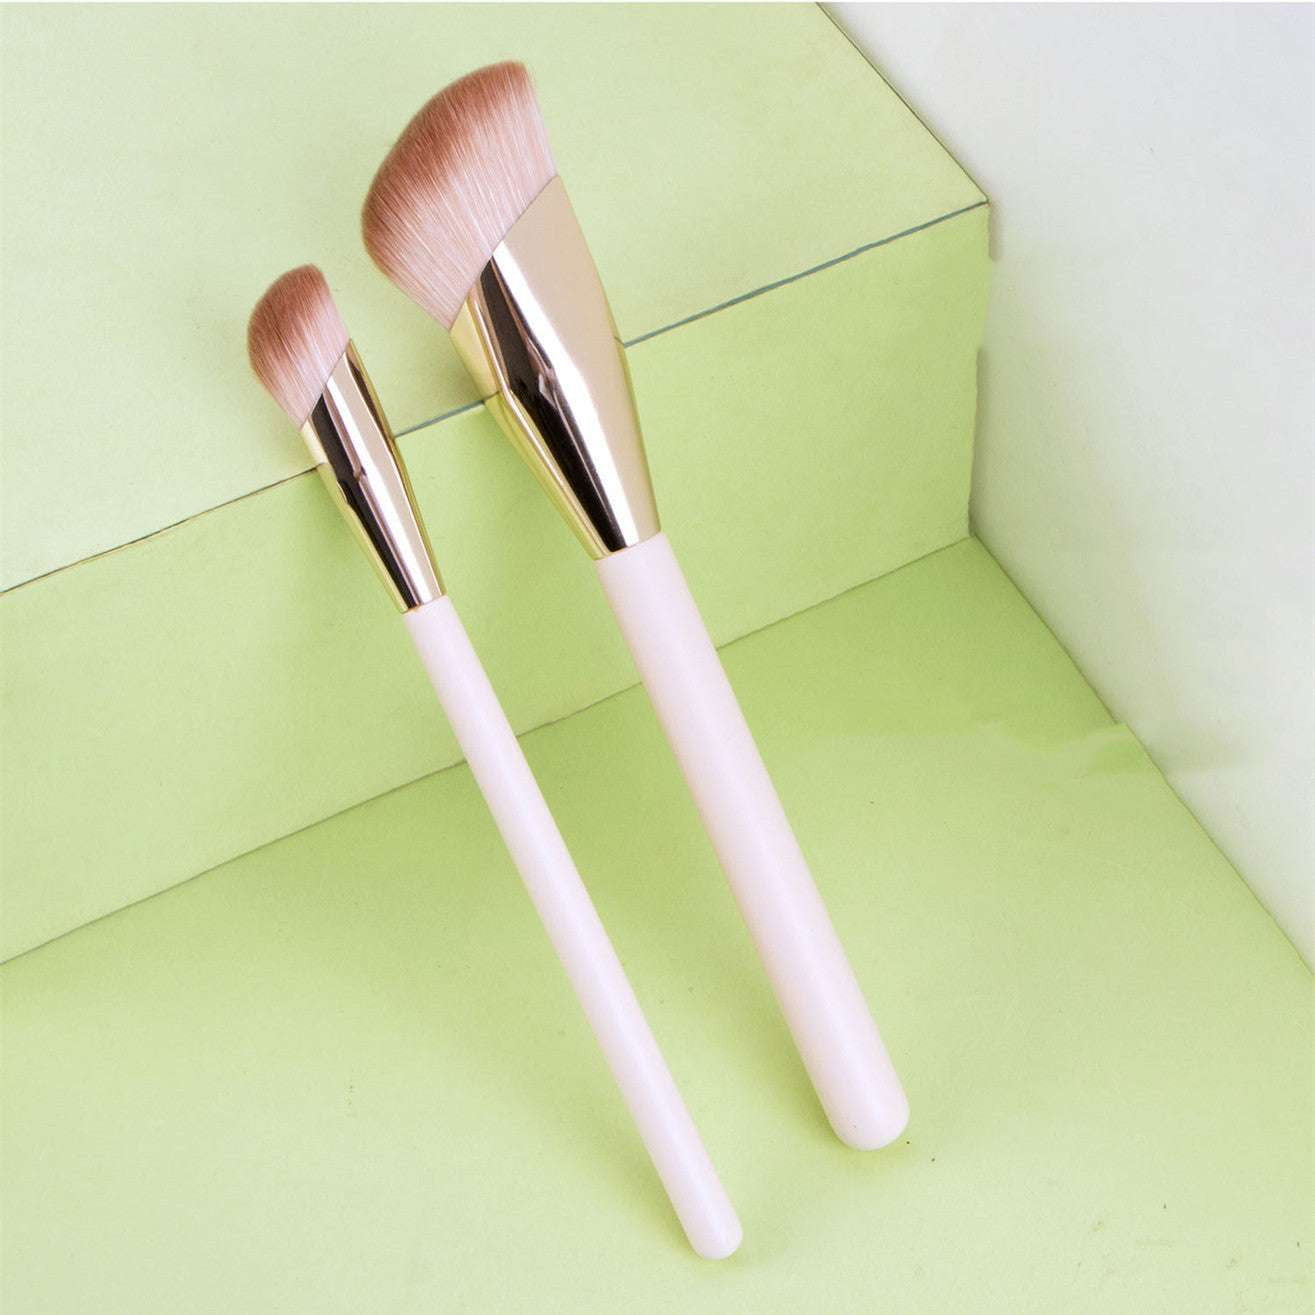 Dual-Size Brush Pack, Fingertip Concealer Brush, Soft Synthetic Bristles - available at Sparq Mart